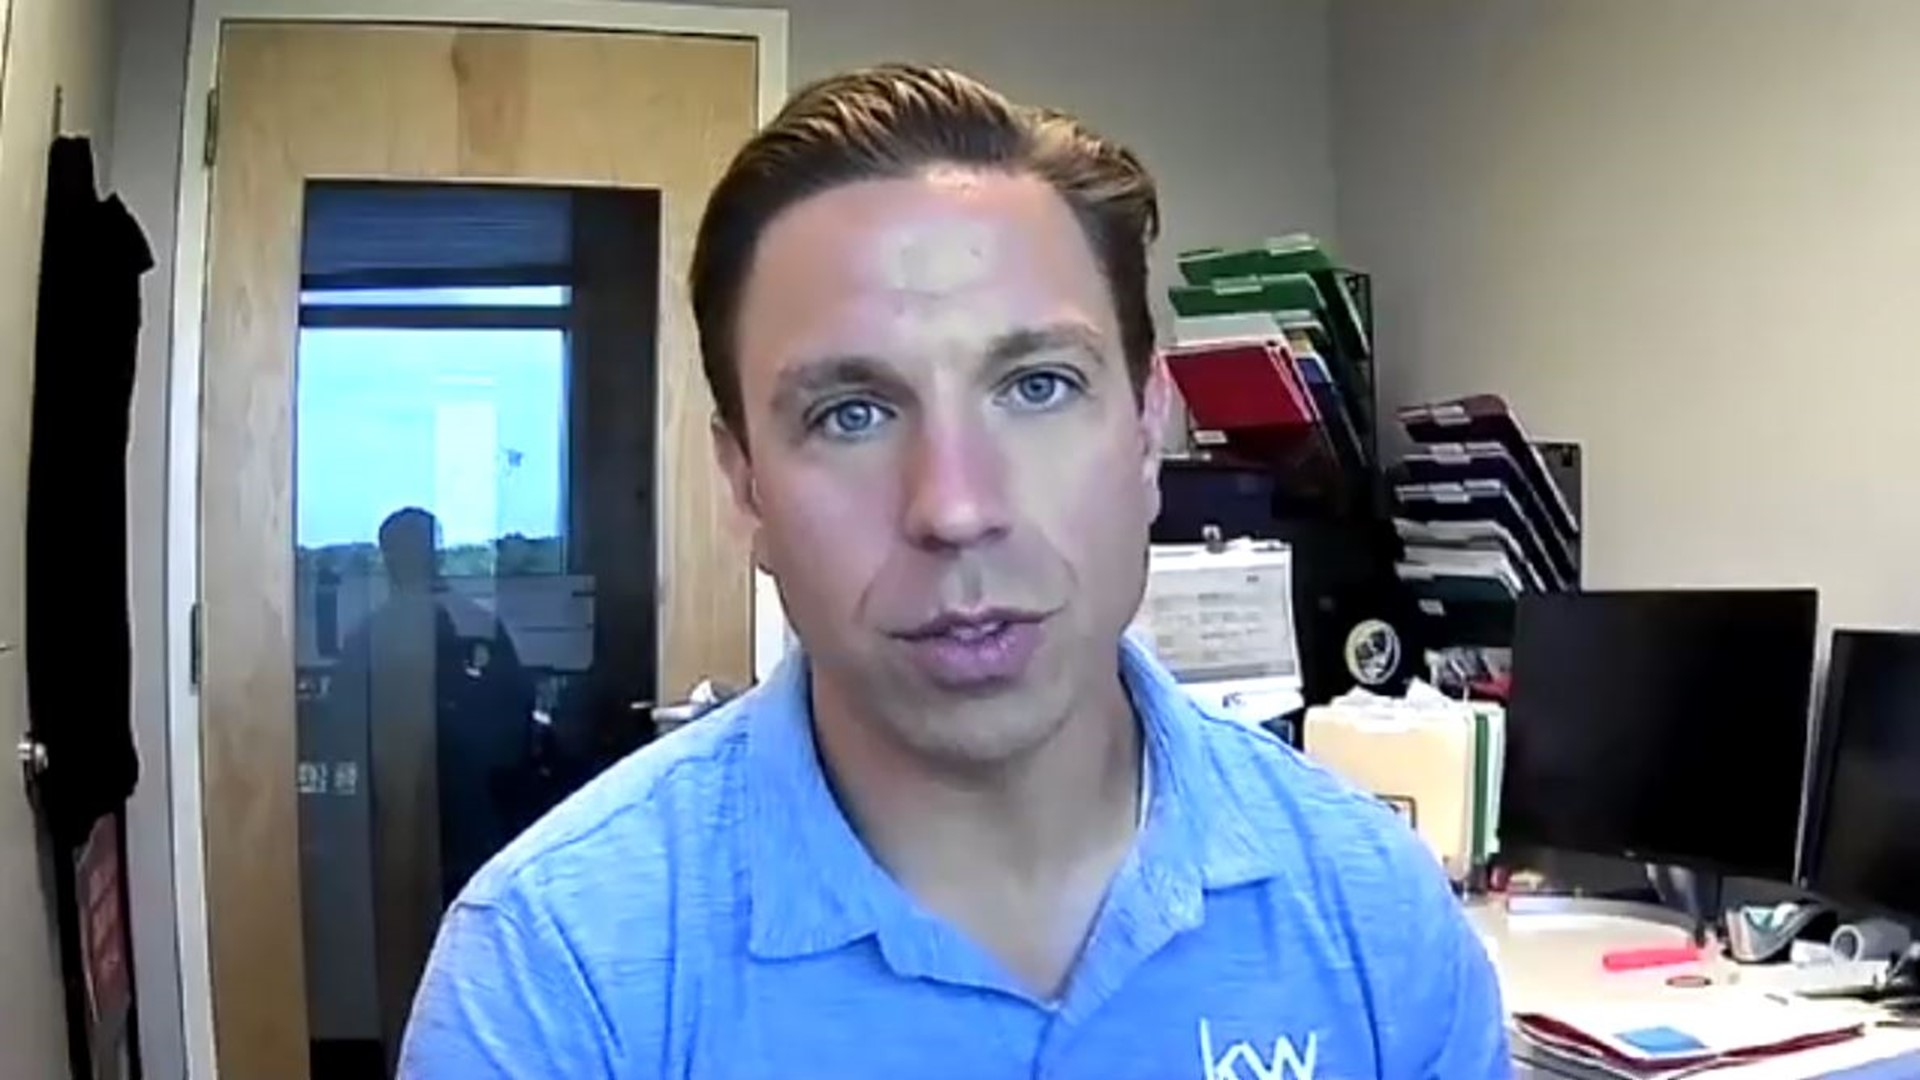 Jason Coleman of Keller Williams Realty gives his take on the 2021 Triad housing market deadlock between buyers and sellers.